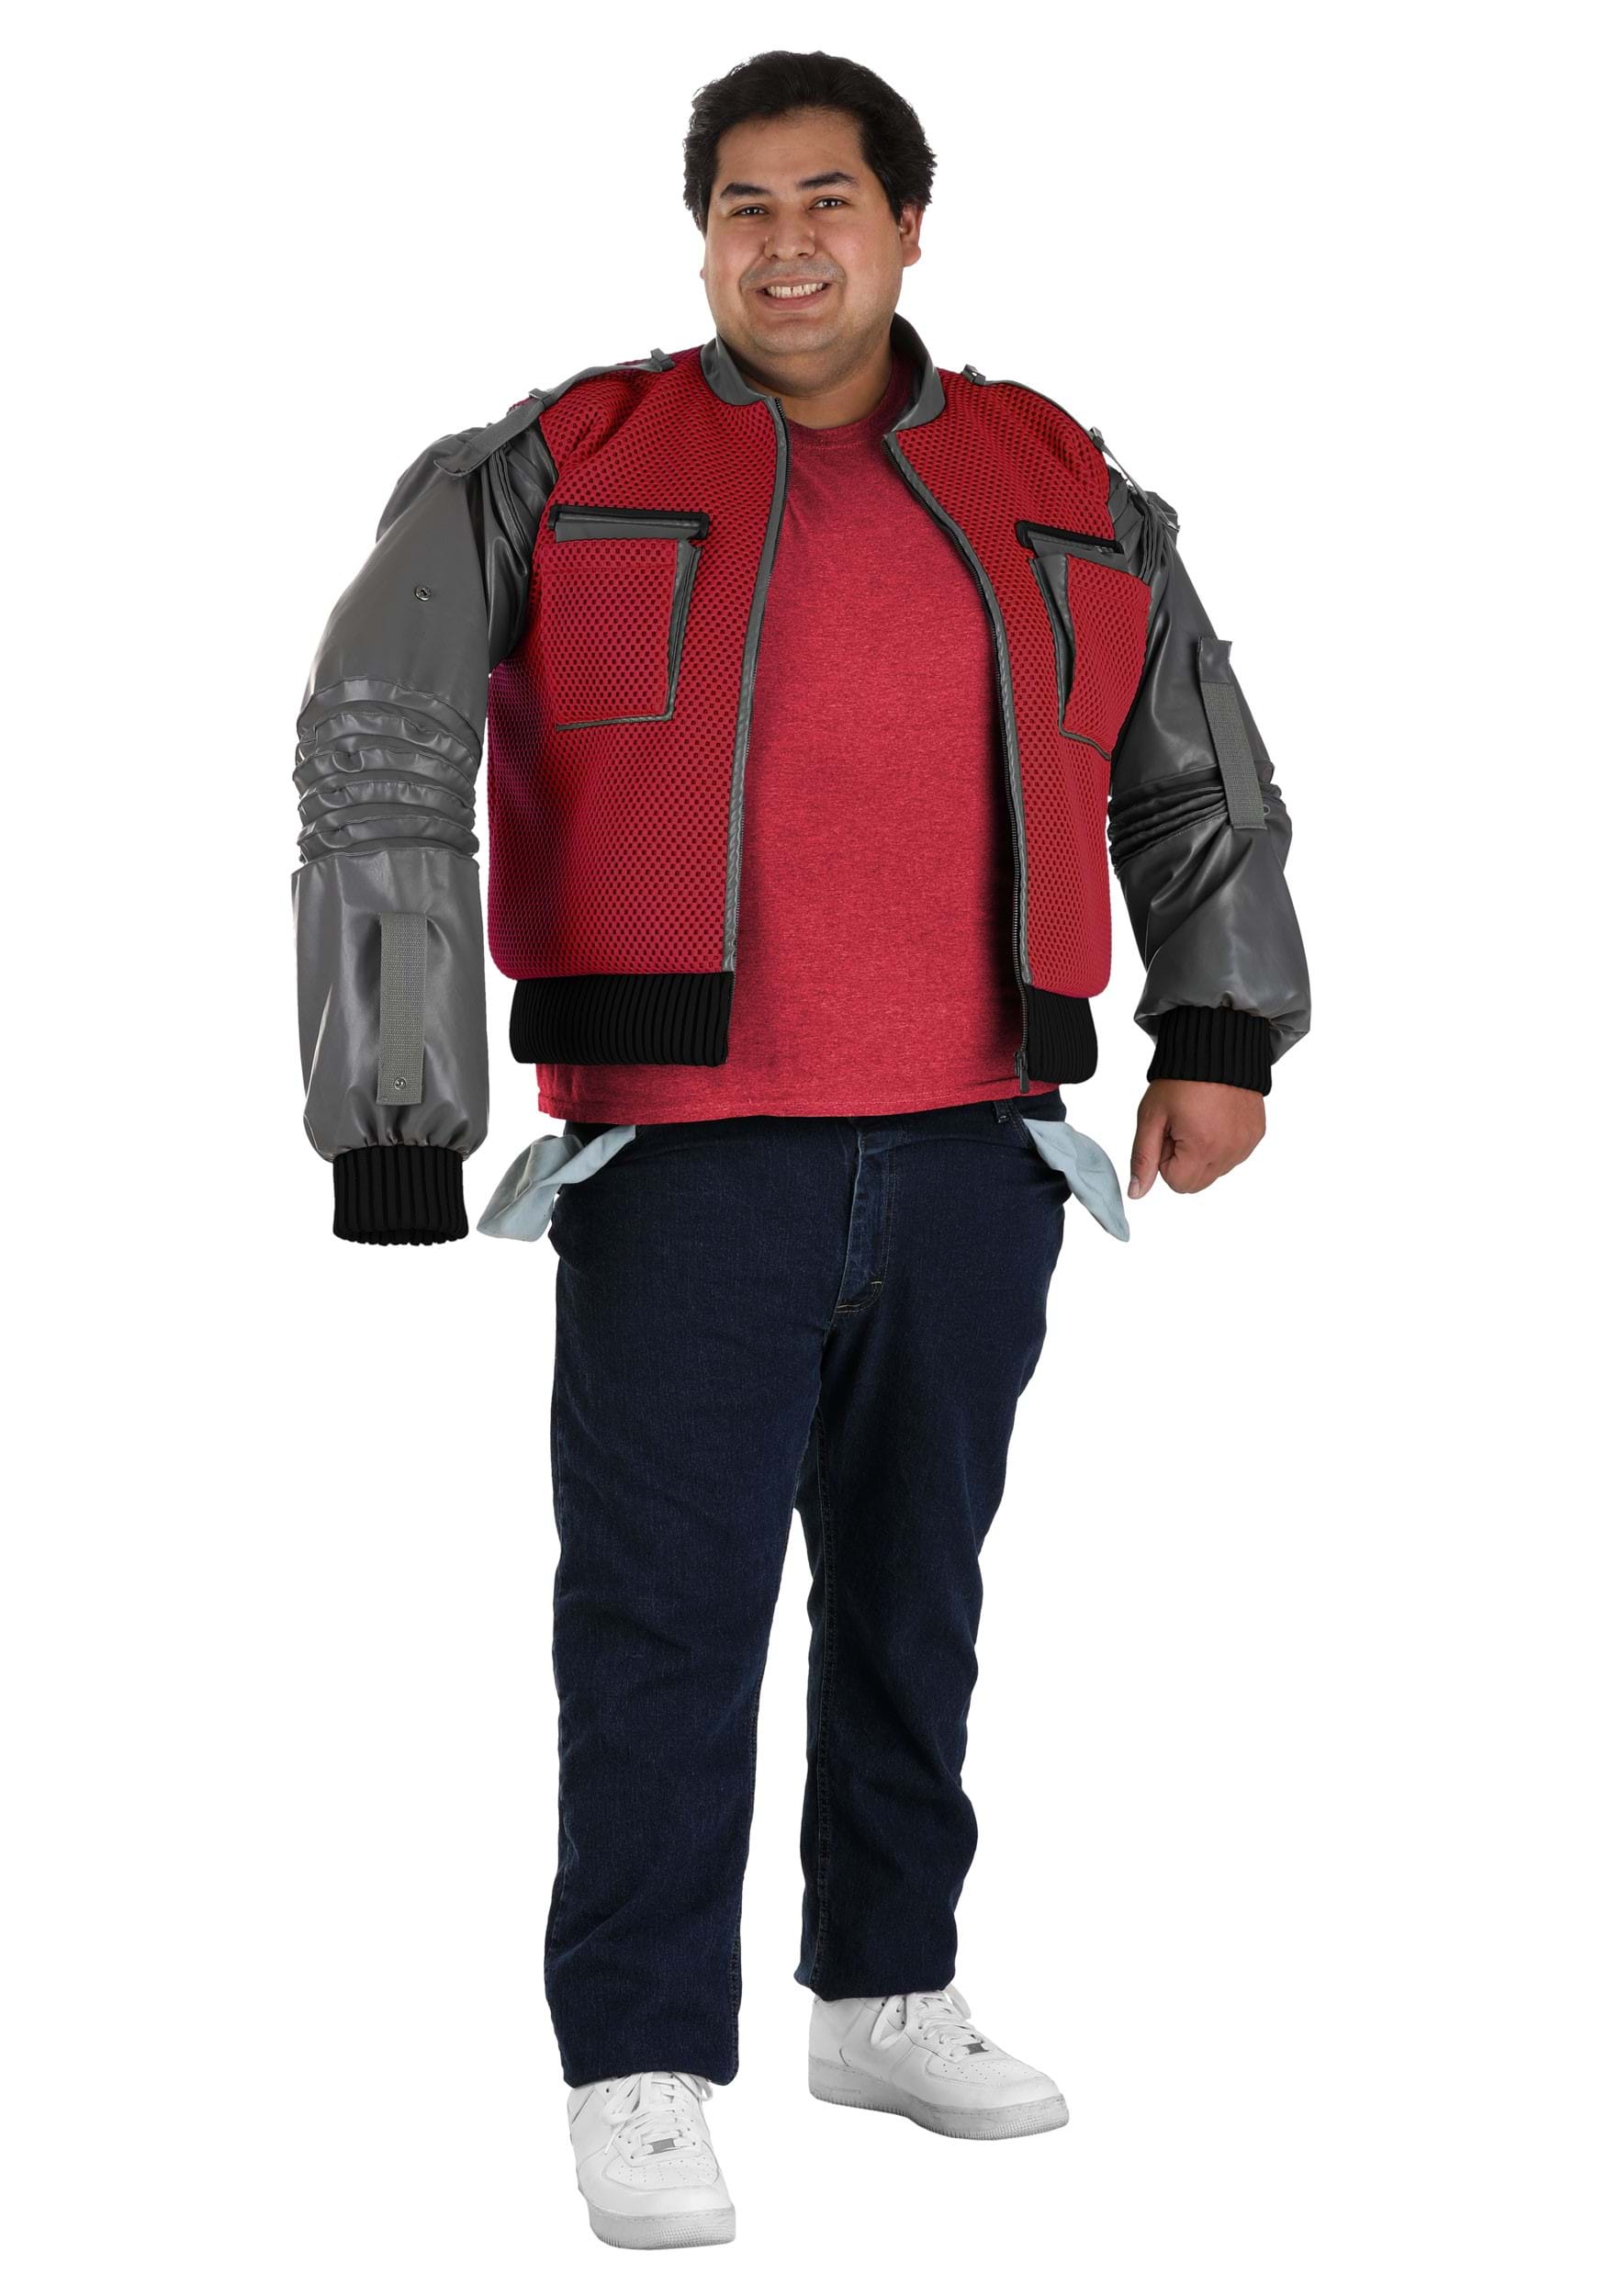 Photos - Fancy Dress FUN Costumes Plus Size Authentic Marty McFly Men's Jacket Costume from Bac